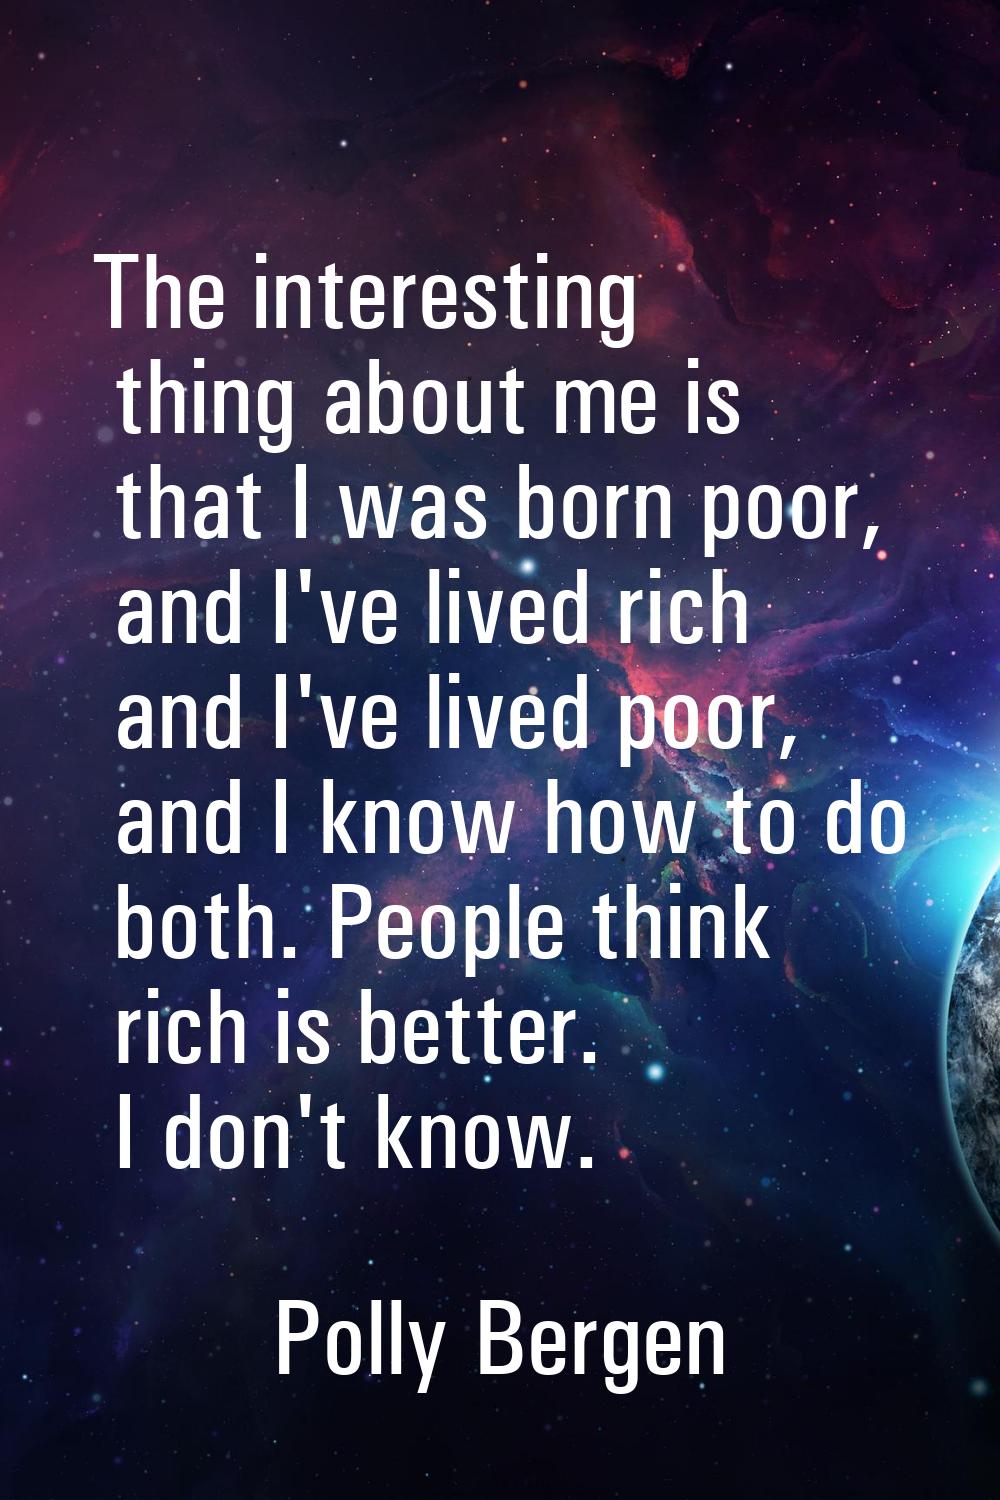 The interesting thing about me is that I was born poor, and I've lived rich and I've lived poor, an